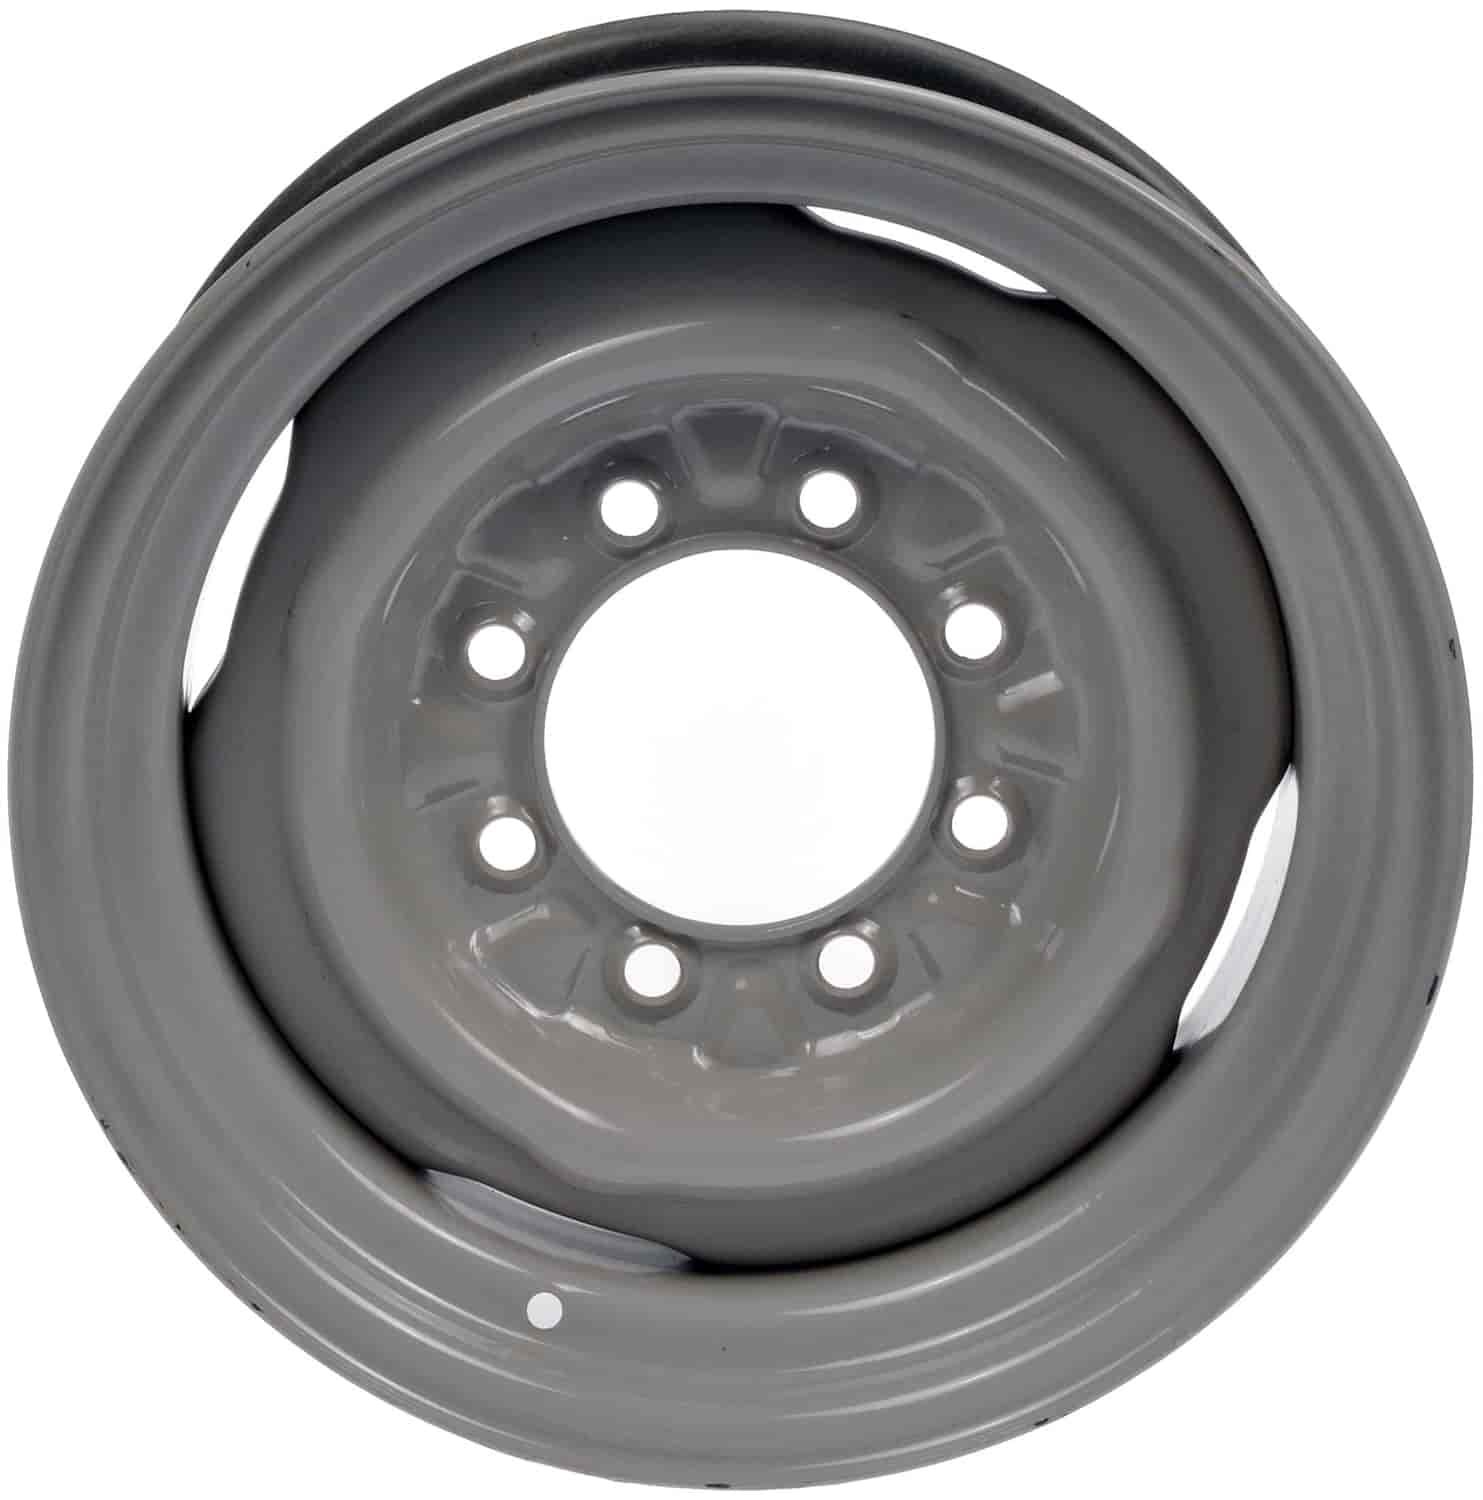 939-198 Steel Wheel for Select 1992-2007 Ford F-250, F-350, E-150-E-350 [16 in. x 7 in.]